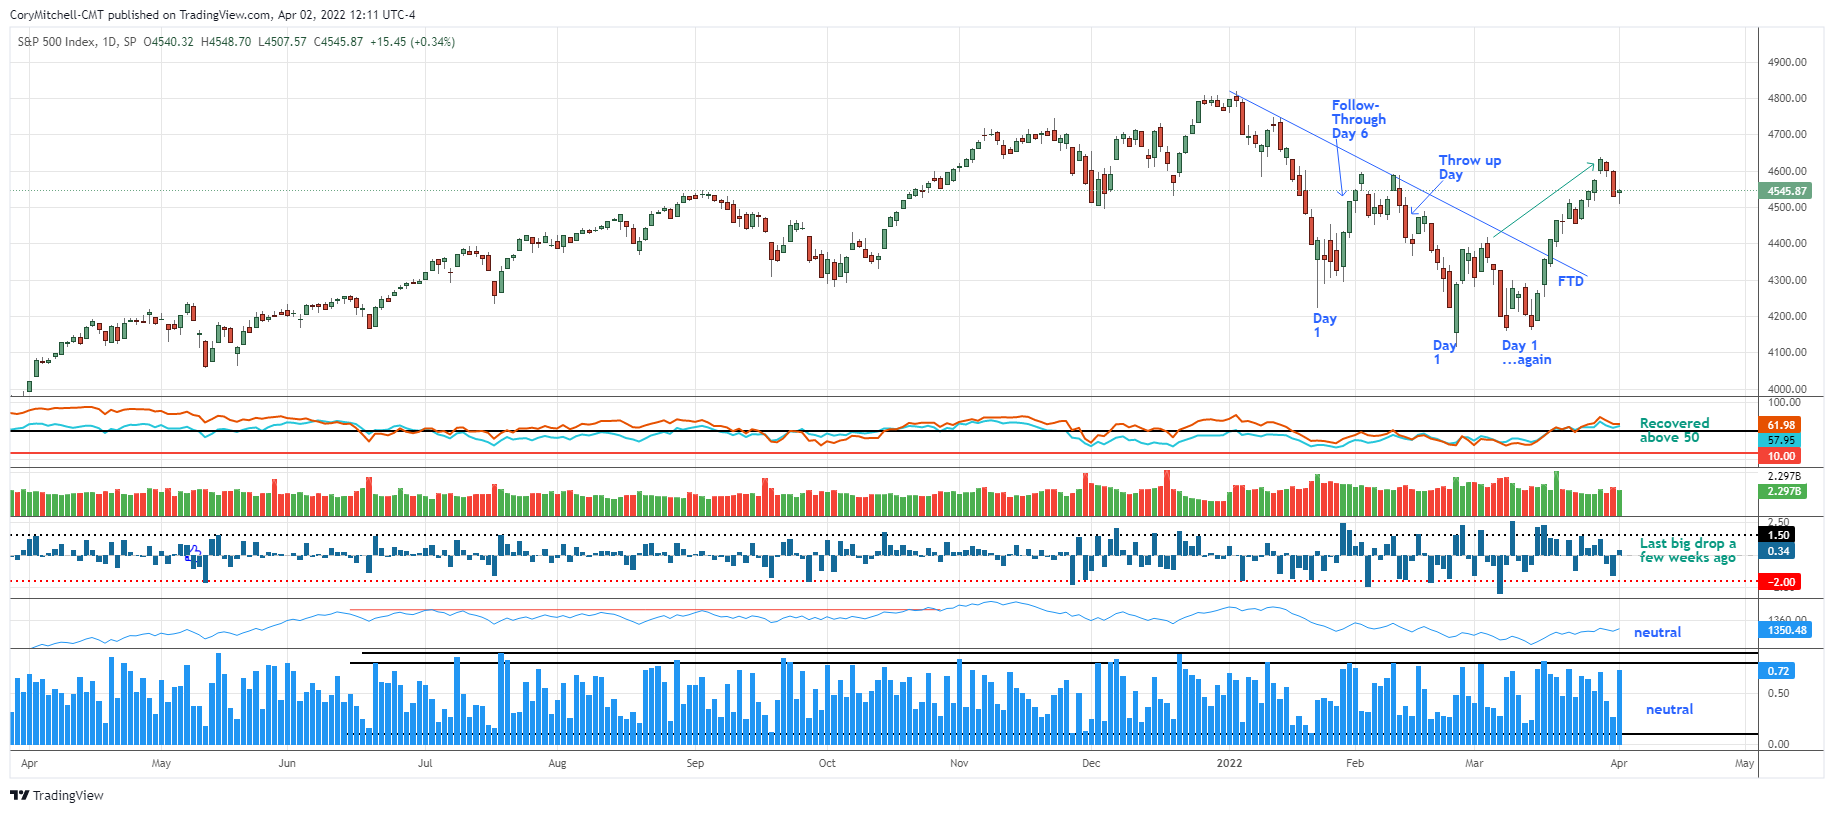 S&P 500 daily chart with market health indicators